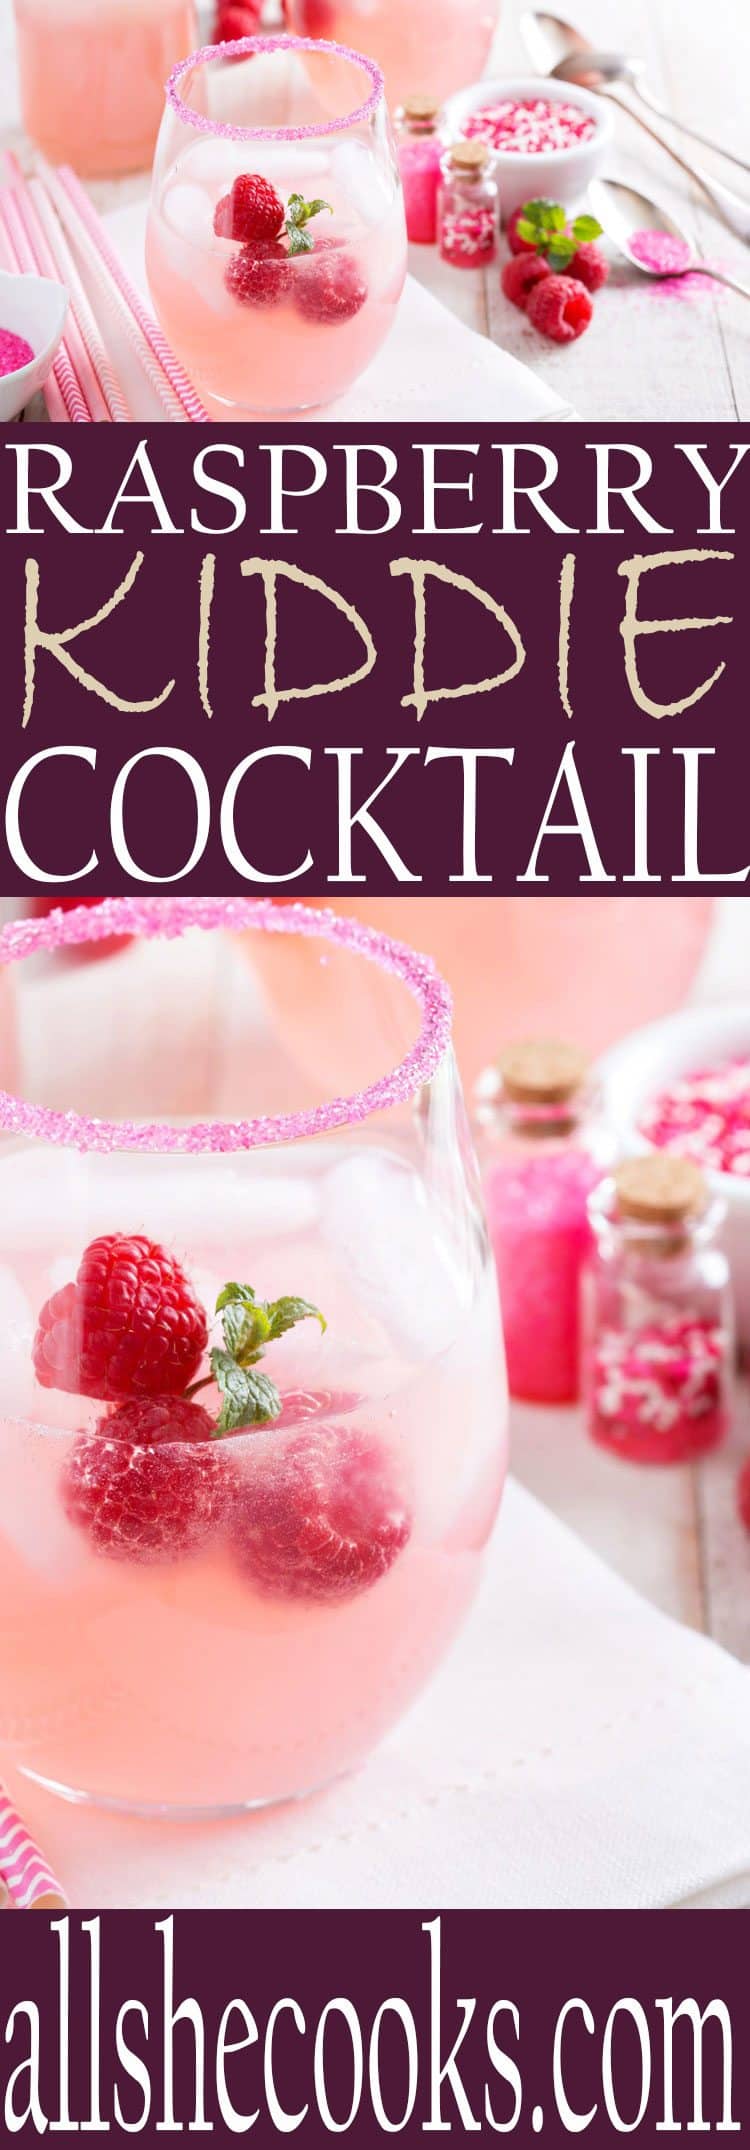 Looking for a kid's party drink? This Raspberry Kiddie Cocktail is the perfect drink to enjoy at a party.